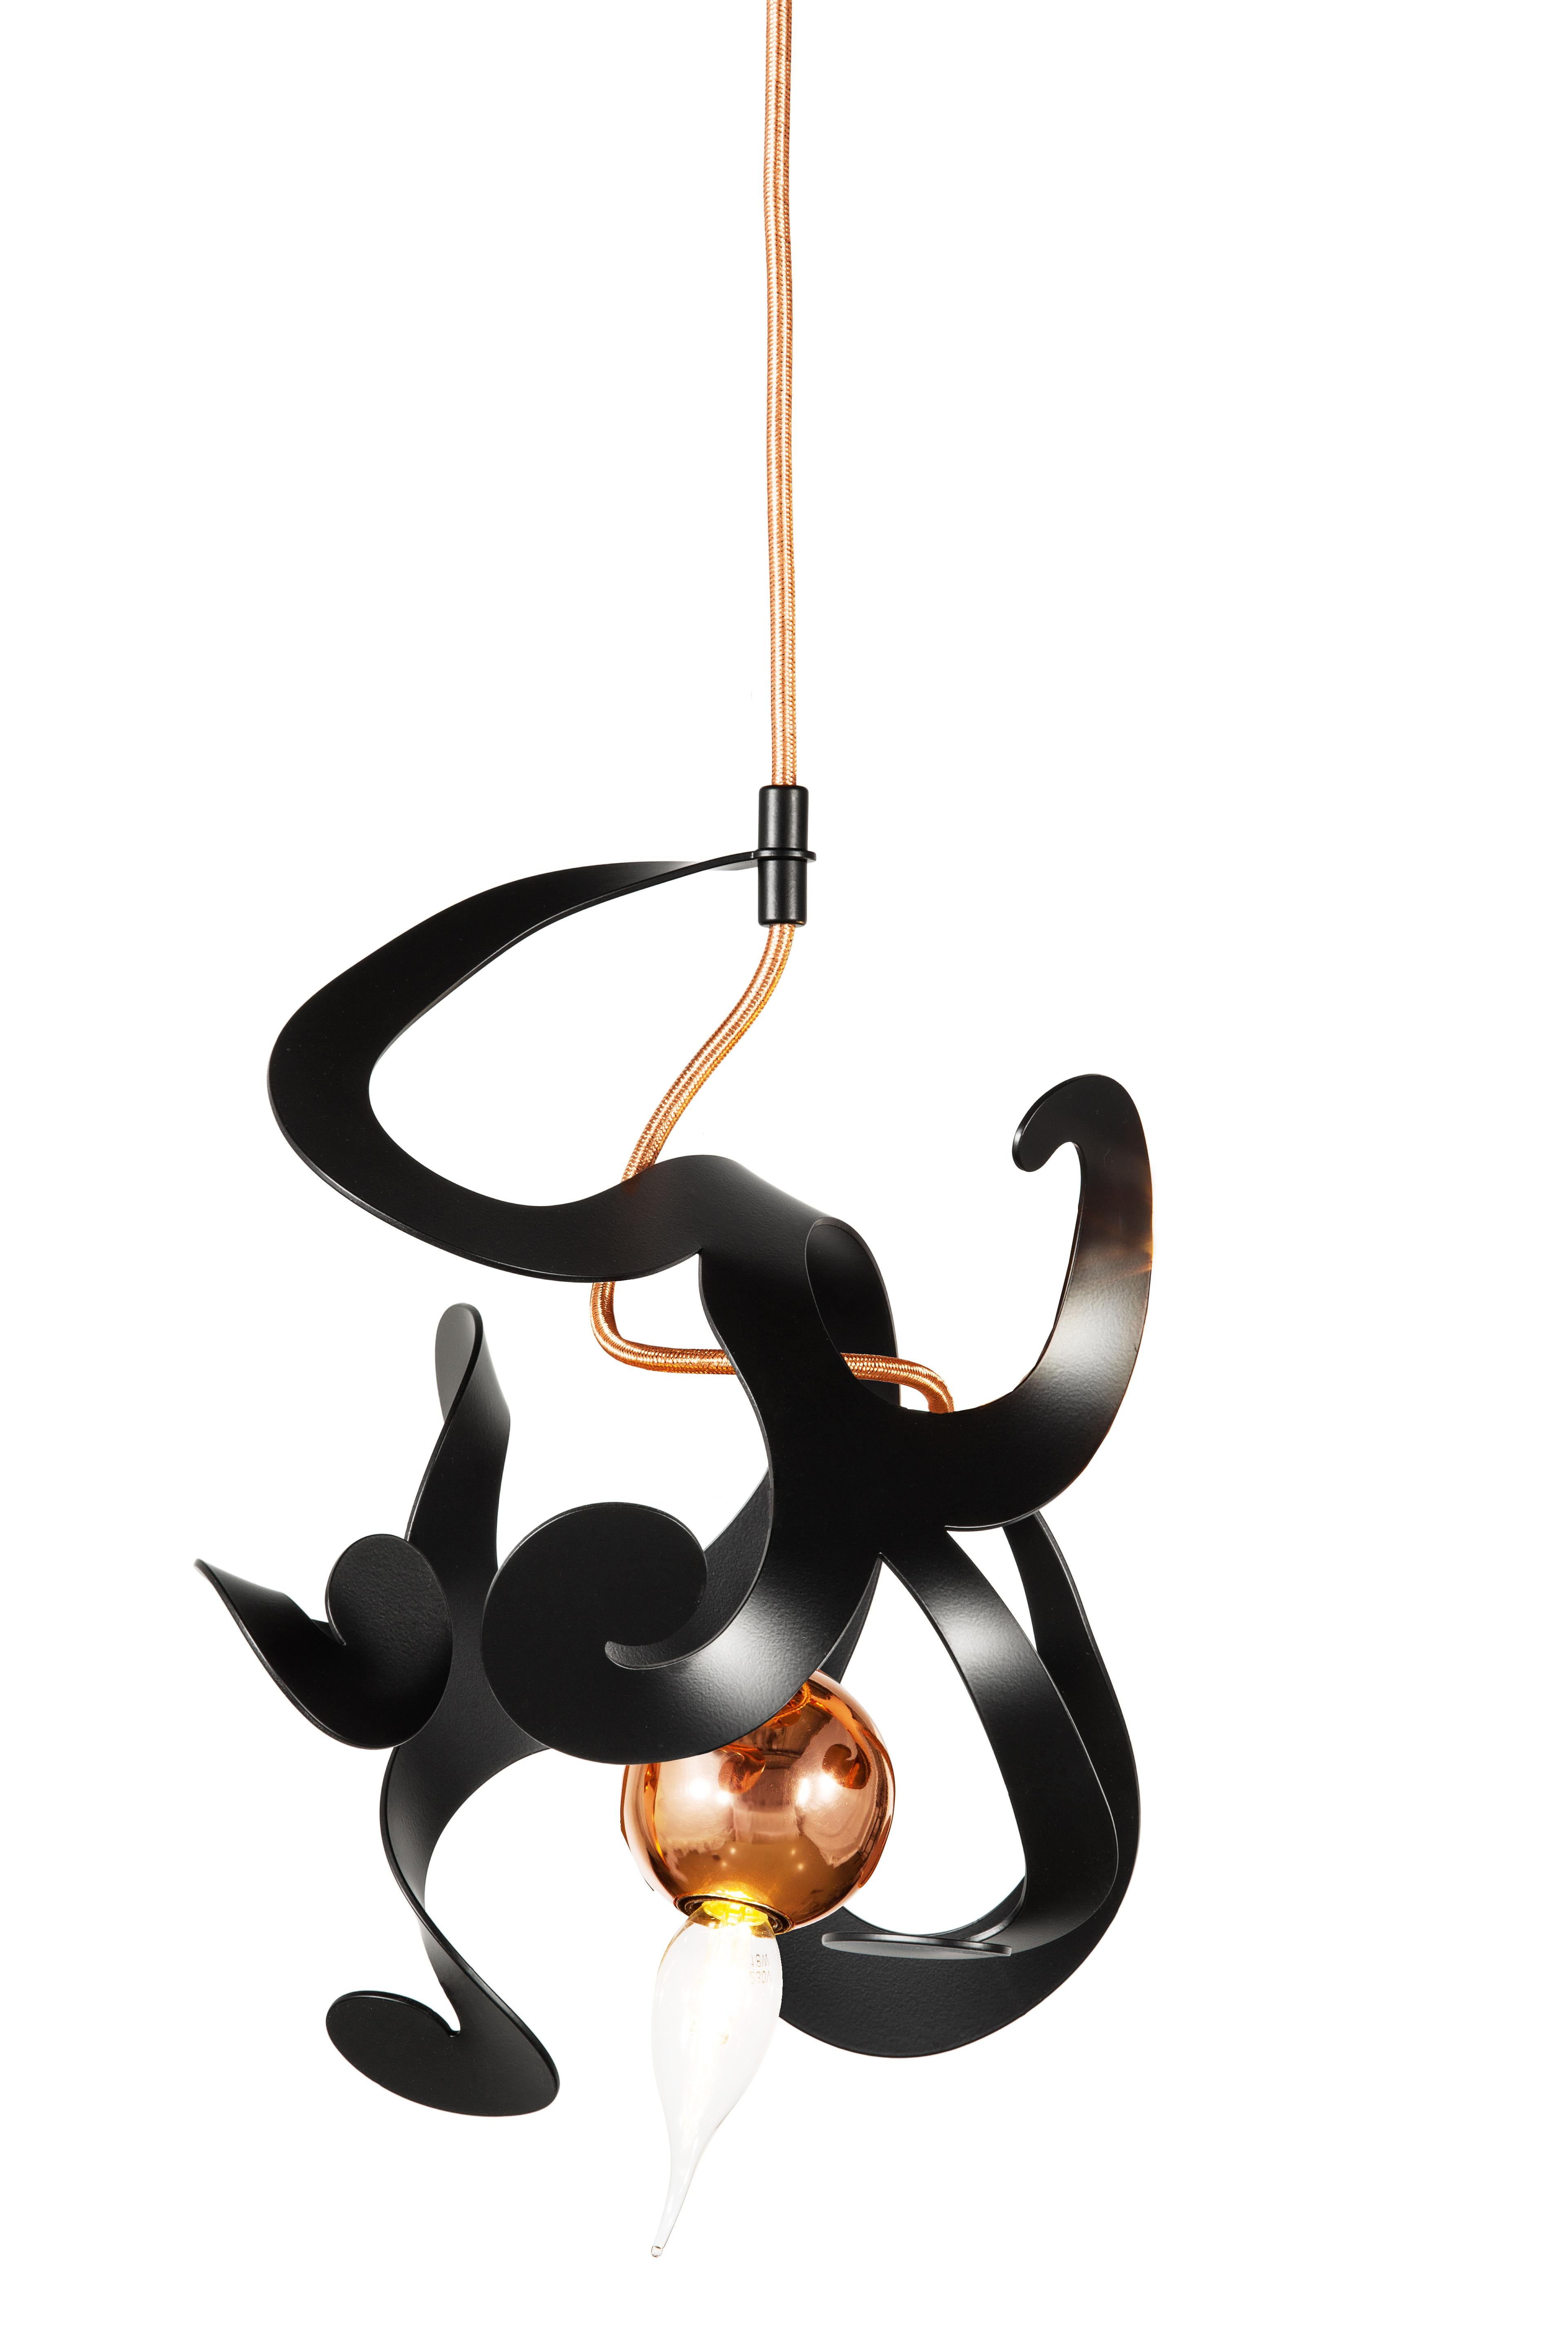 The Kelp modern pendant in a black matt finish, designed by William Brand, is a free and playful organic lighting sculpture in the collection of Brand van Egmond. The seemingly randomness of the lighting sculpture, yet carefully arranged ornaments